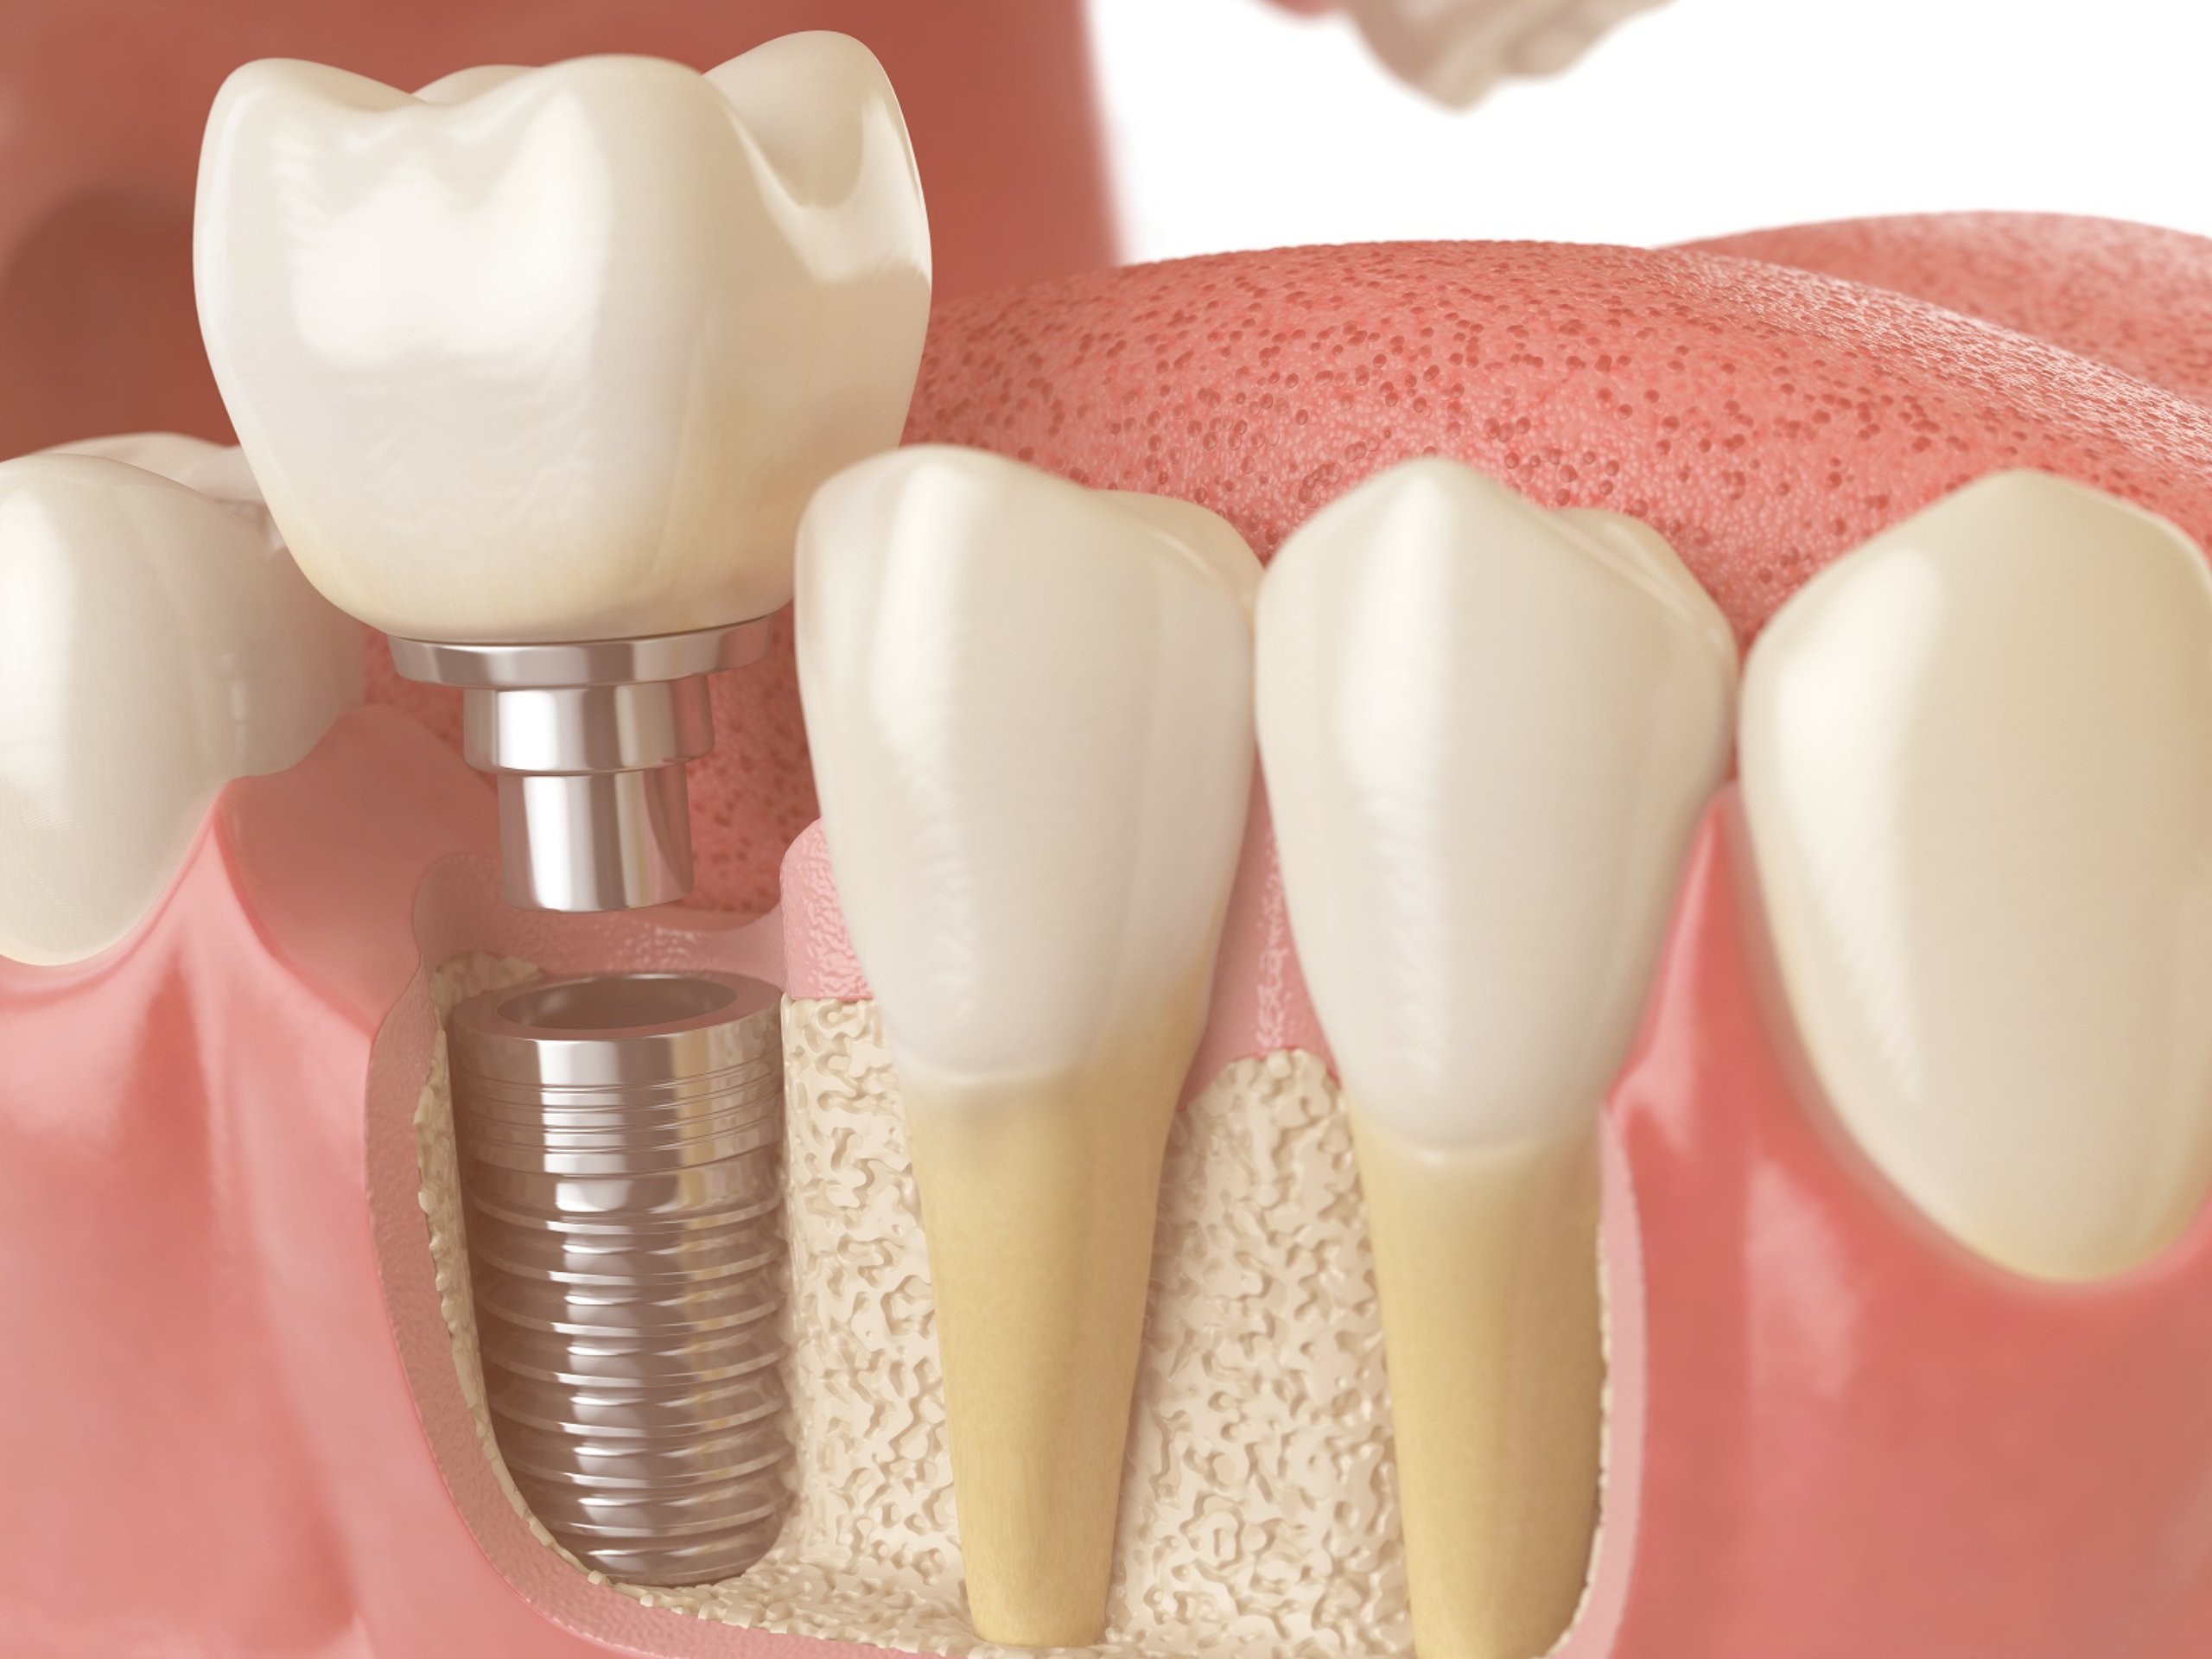 Bone Grafting for Dental Implants: What Is It and How Does It Work?